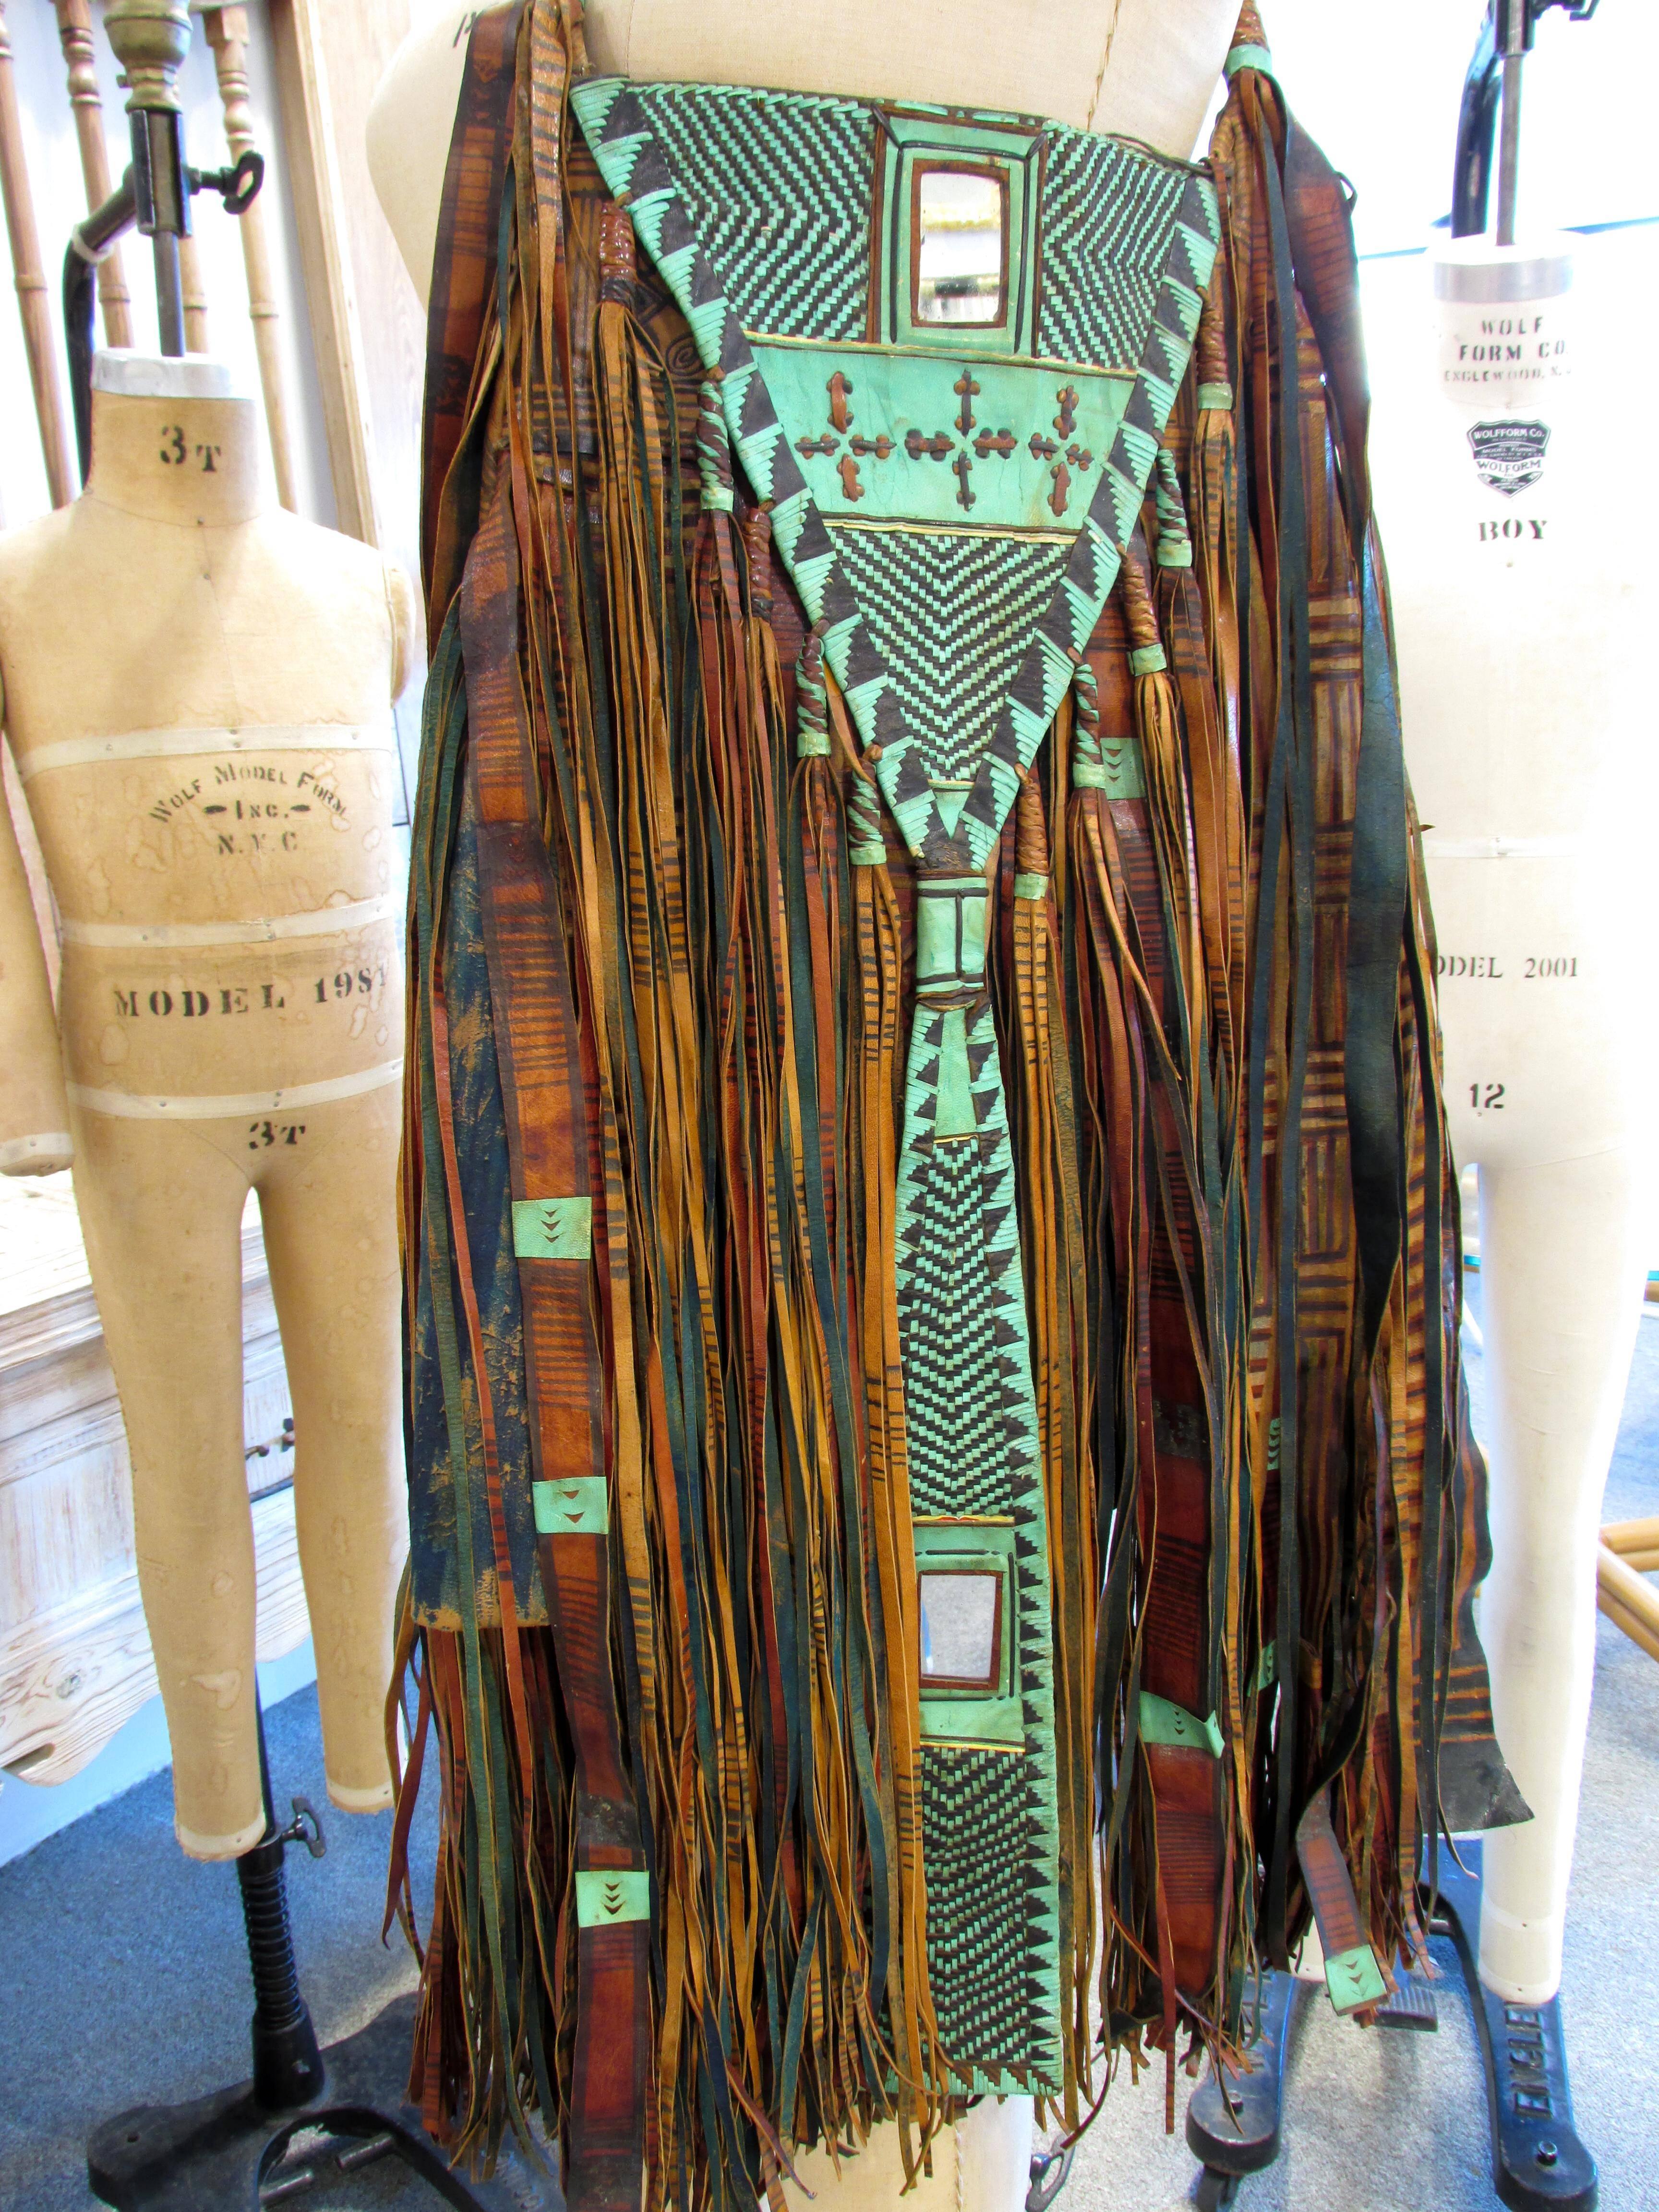 Incredible vintage 1960s hippie boho fringe leather handbag by the Tuareg people in Nigeria with very deep satchel.